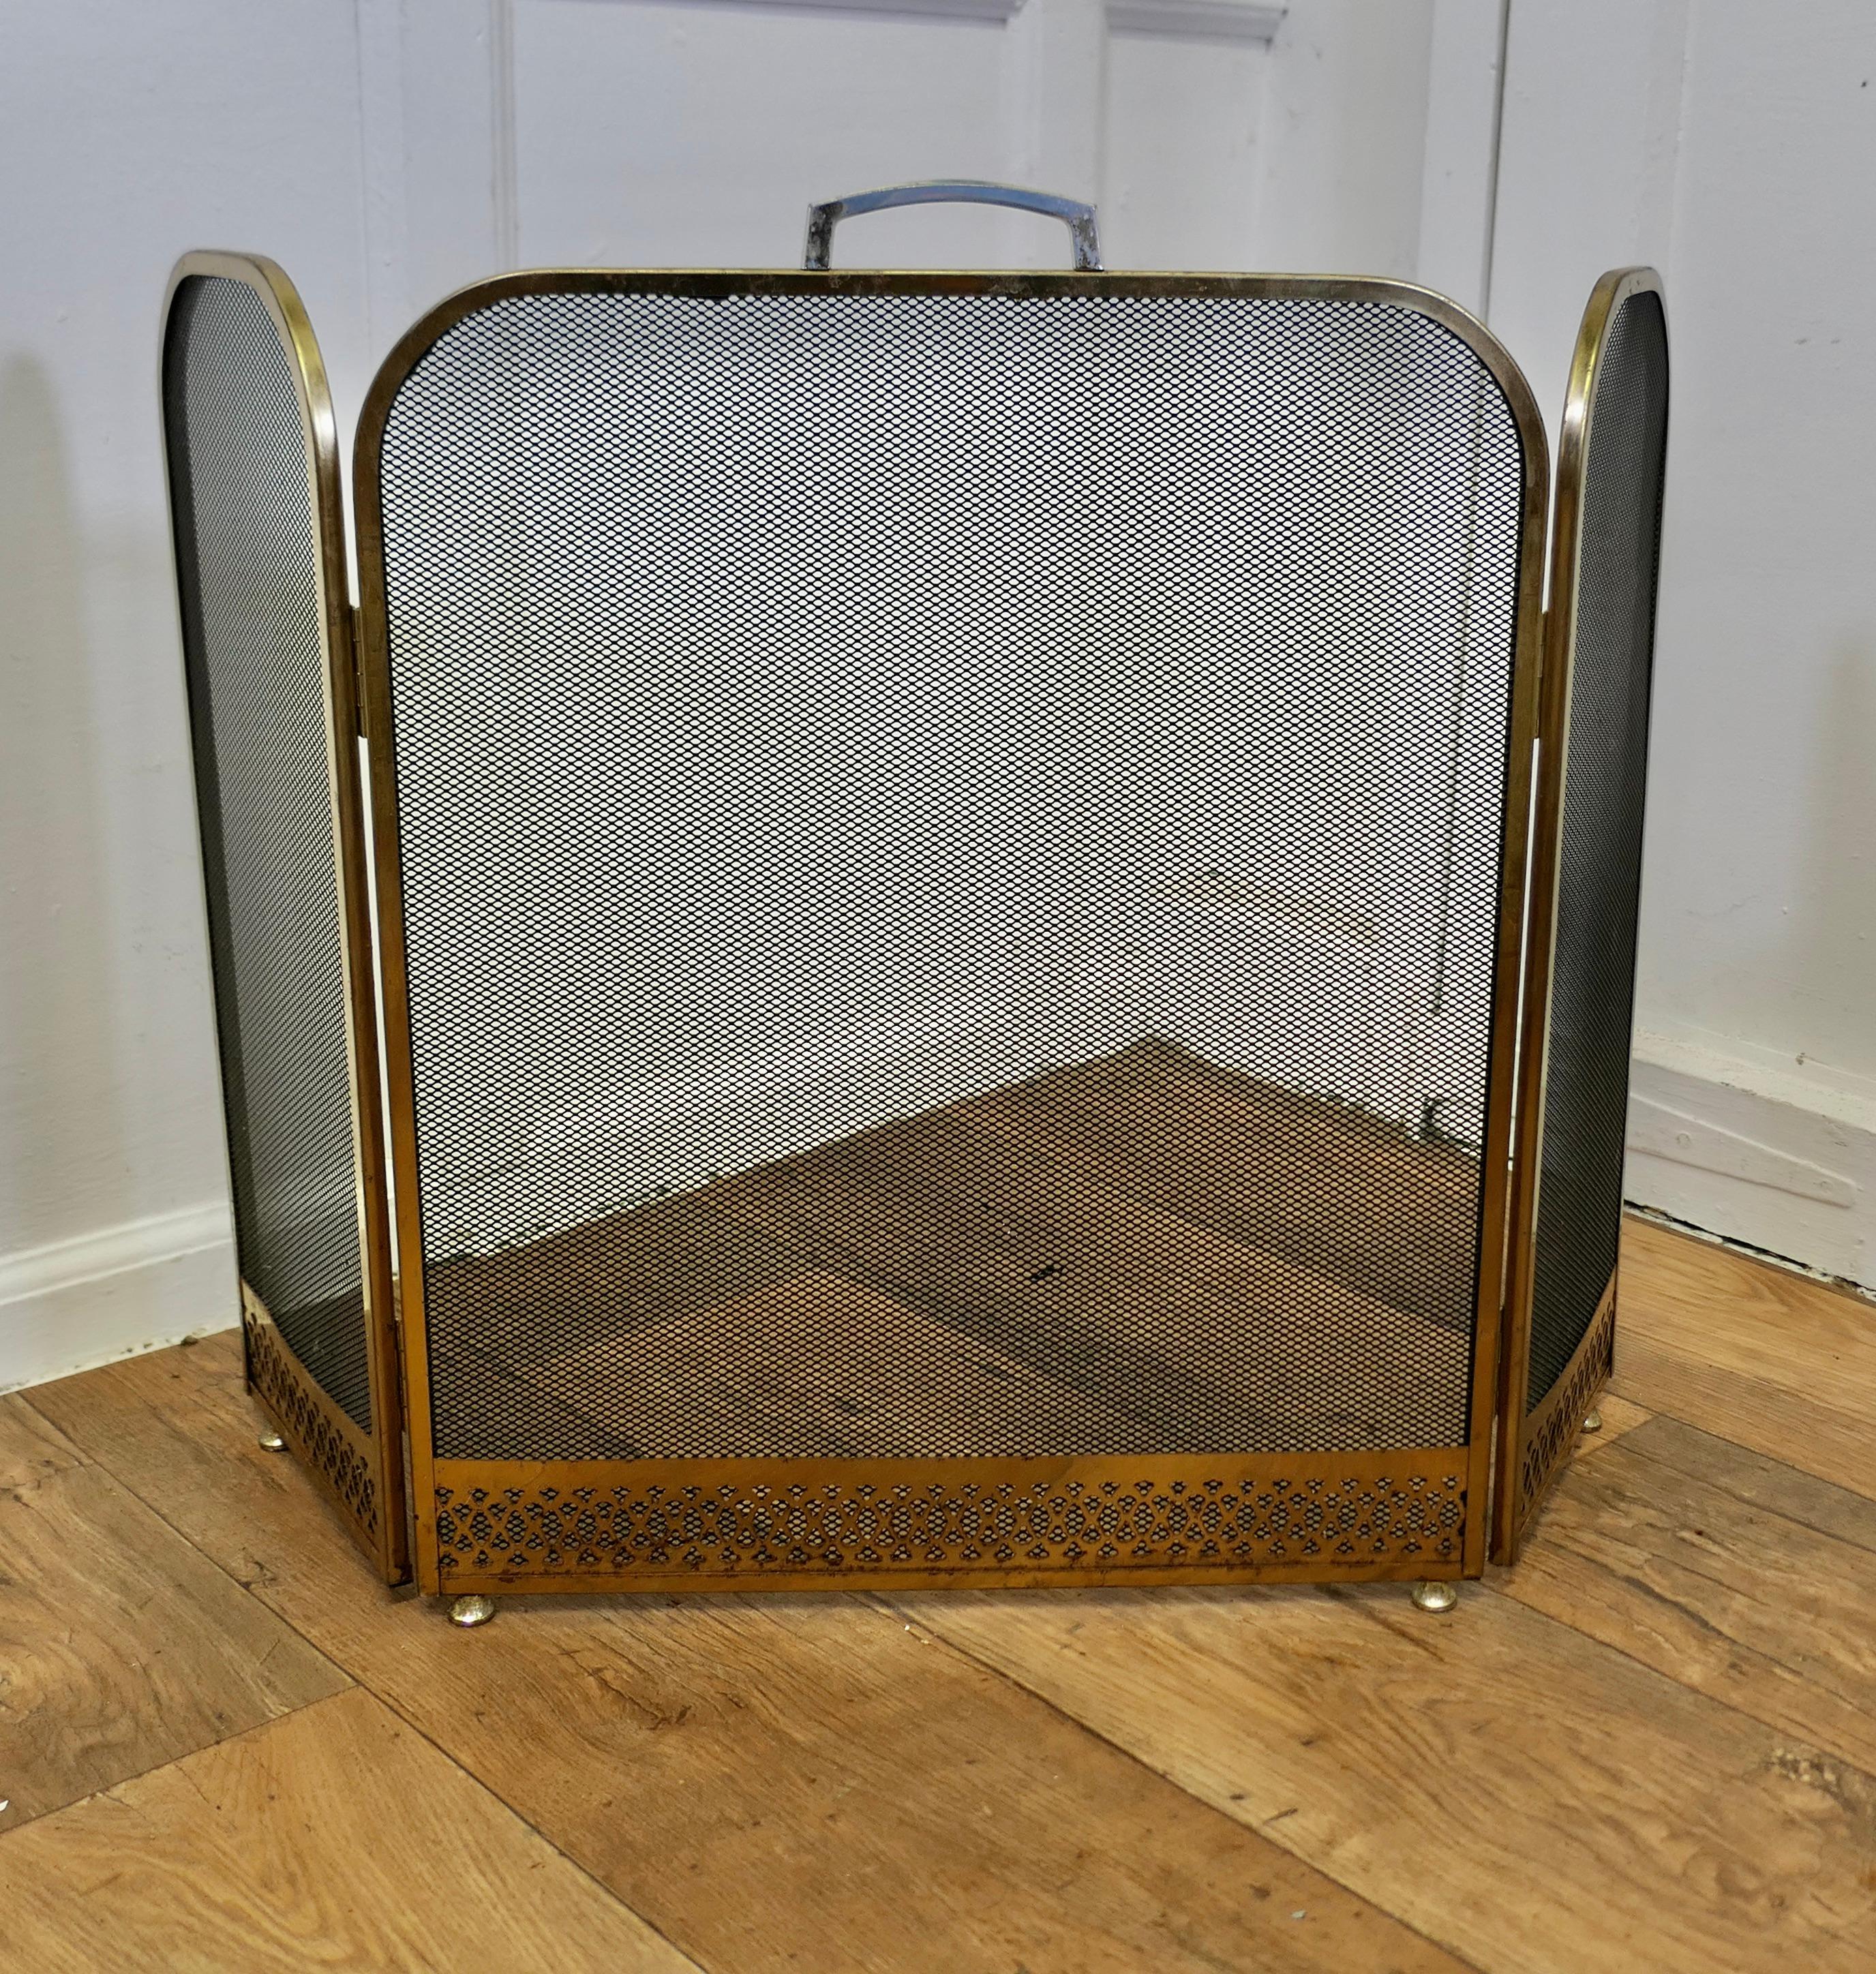 Large Folding Brass Fire Guard 

This very useful spark guard has a decorative brass frame and a fine mesh infill, it has the added advantage that it folds flat for storage, and when opened out it can be shaped to enclose your fire, very useful for